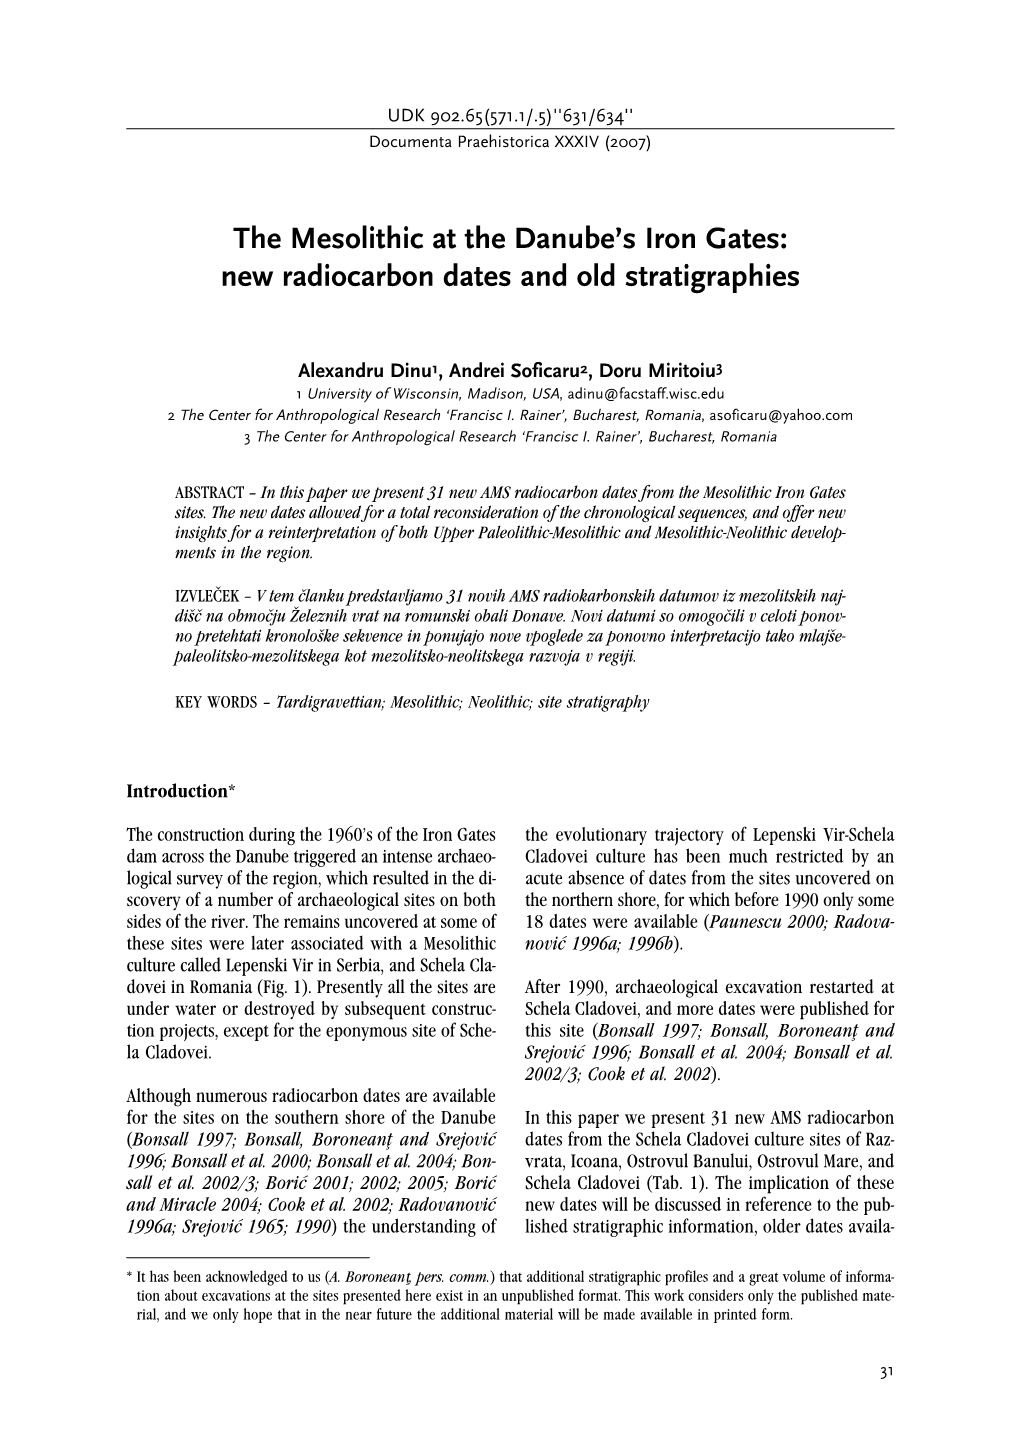 The Mesolithic at the Danube's Iron Gates&gt; New Radiocarbon Dates And